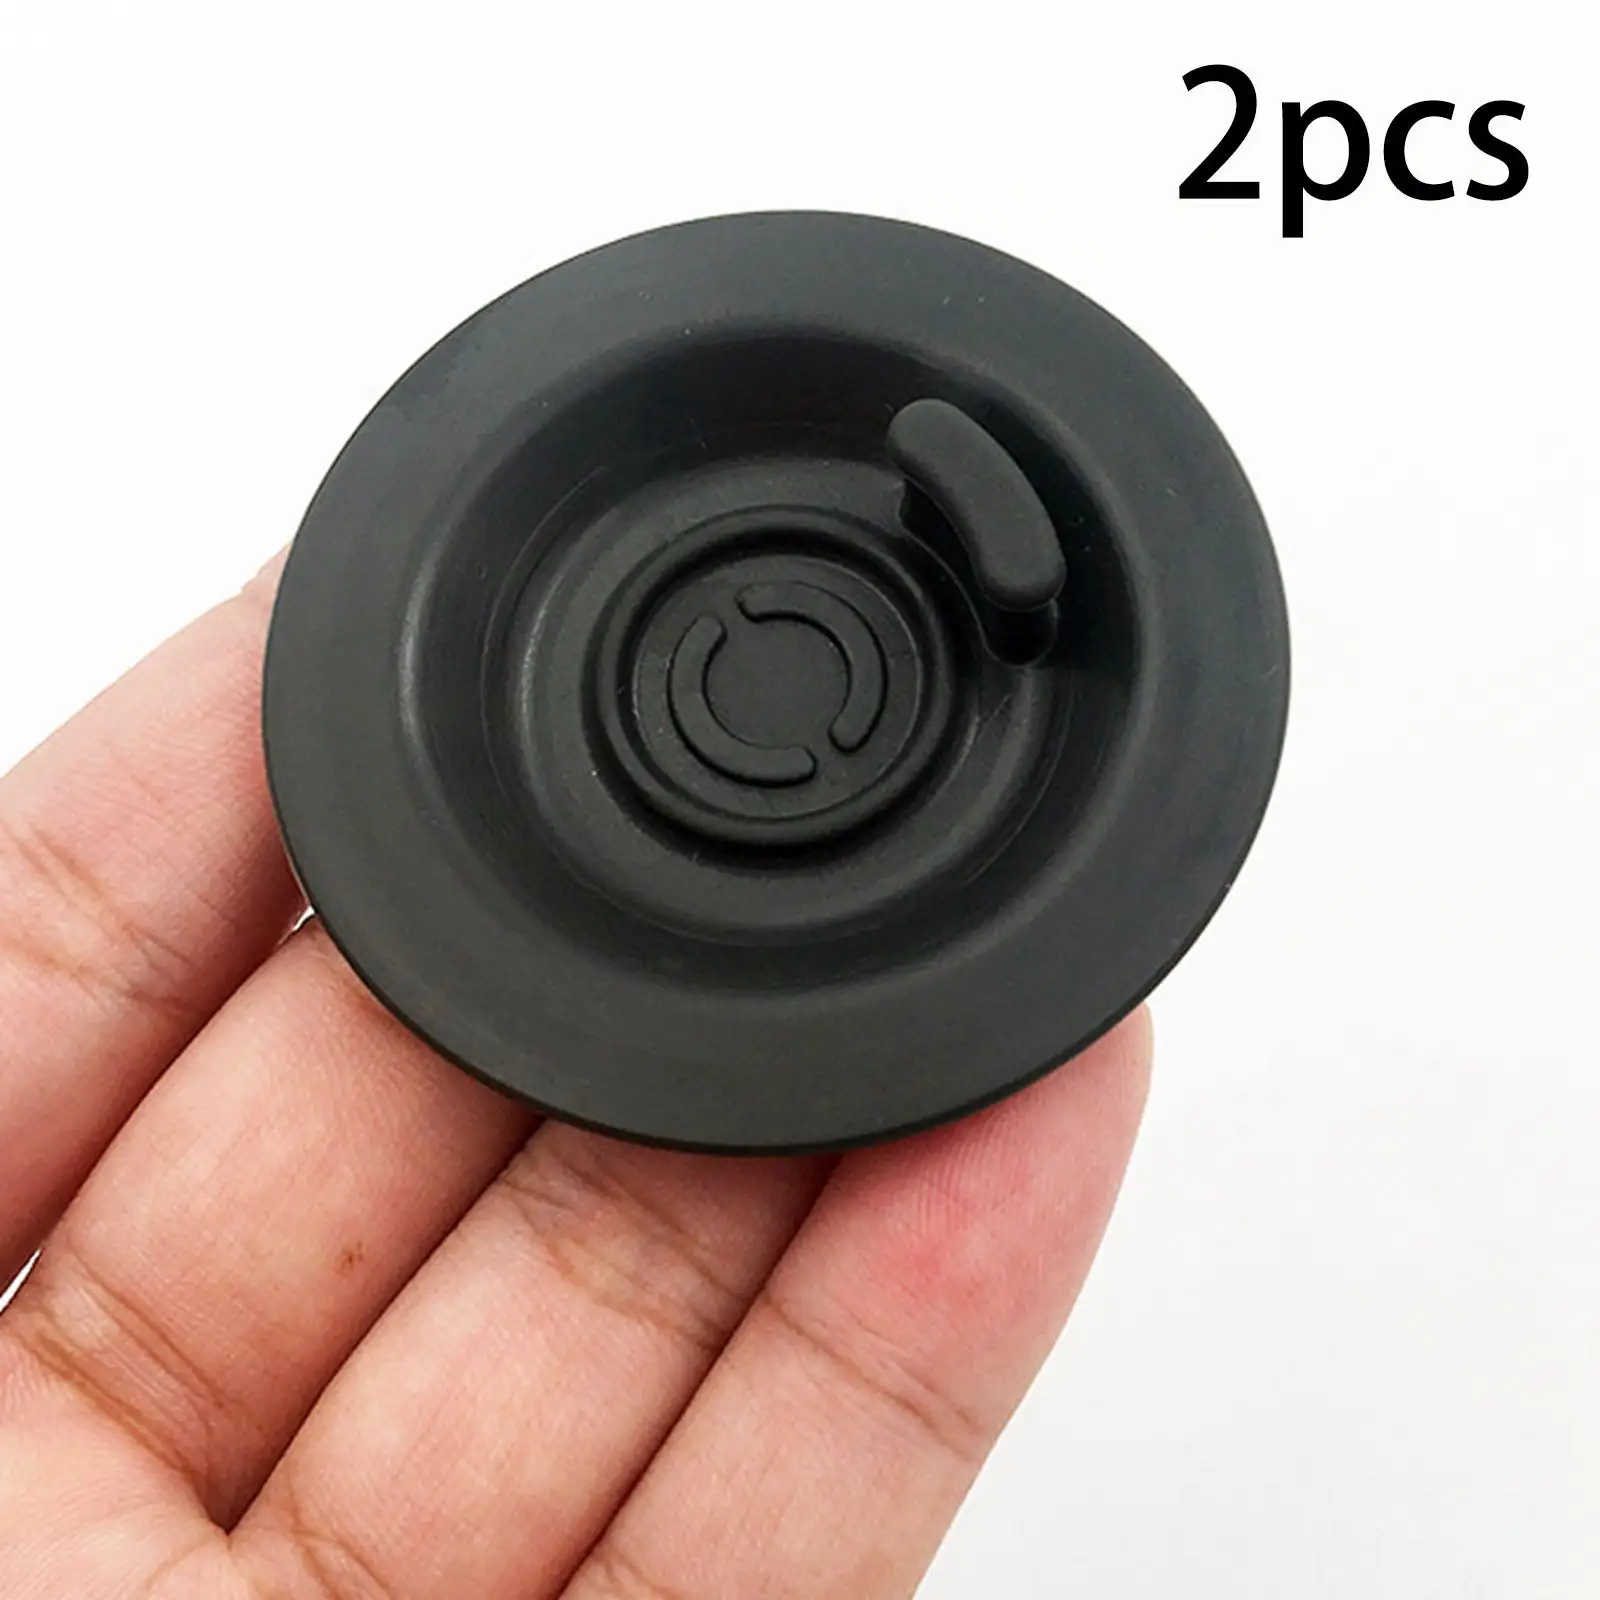 2Pcs Coffee Machine Blanking Disc Replacement Spare Coffee Backflush Disk Parts for Bes870XL Bes878bss Bes880 Espresso Makers